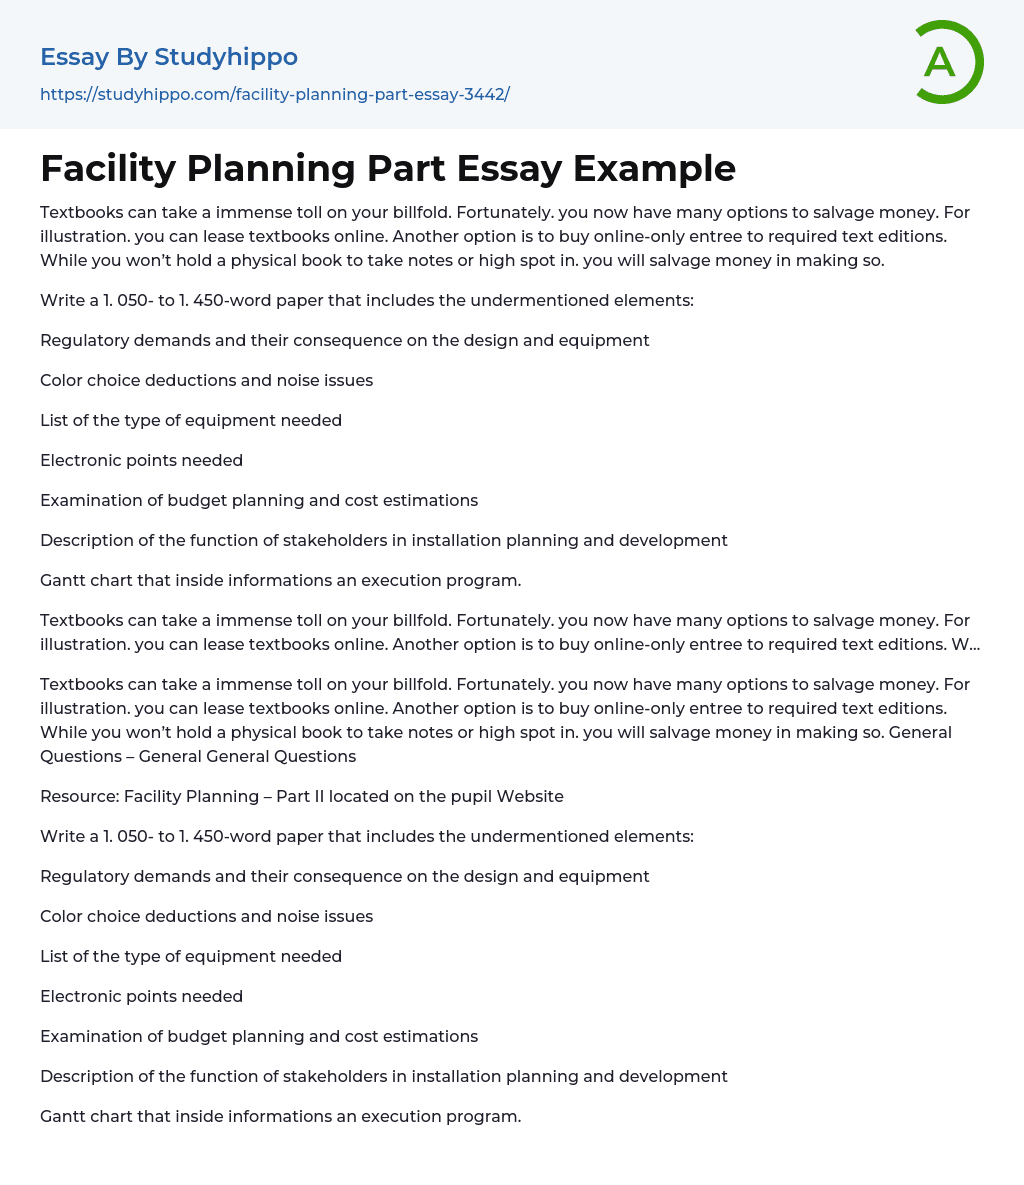 Facility Planning Part Essay Example